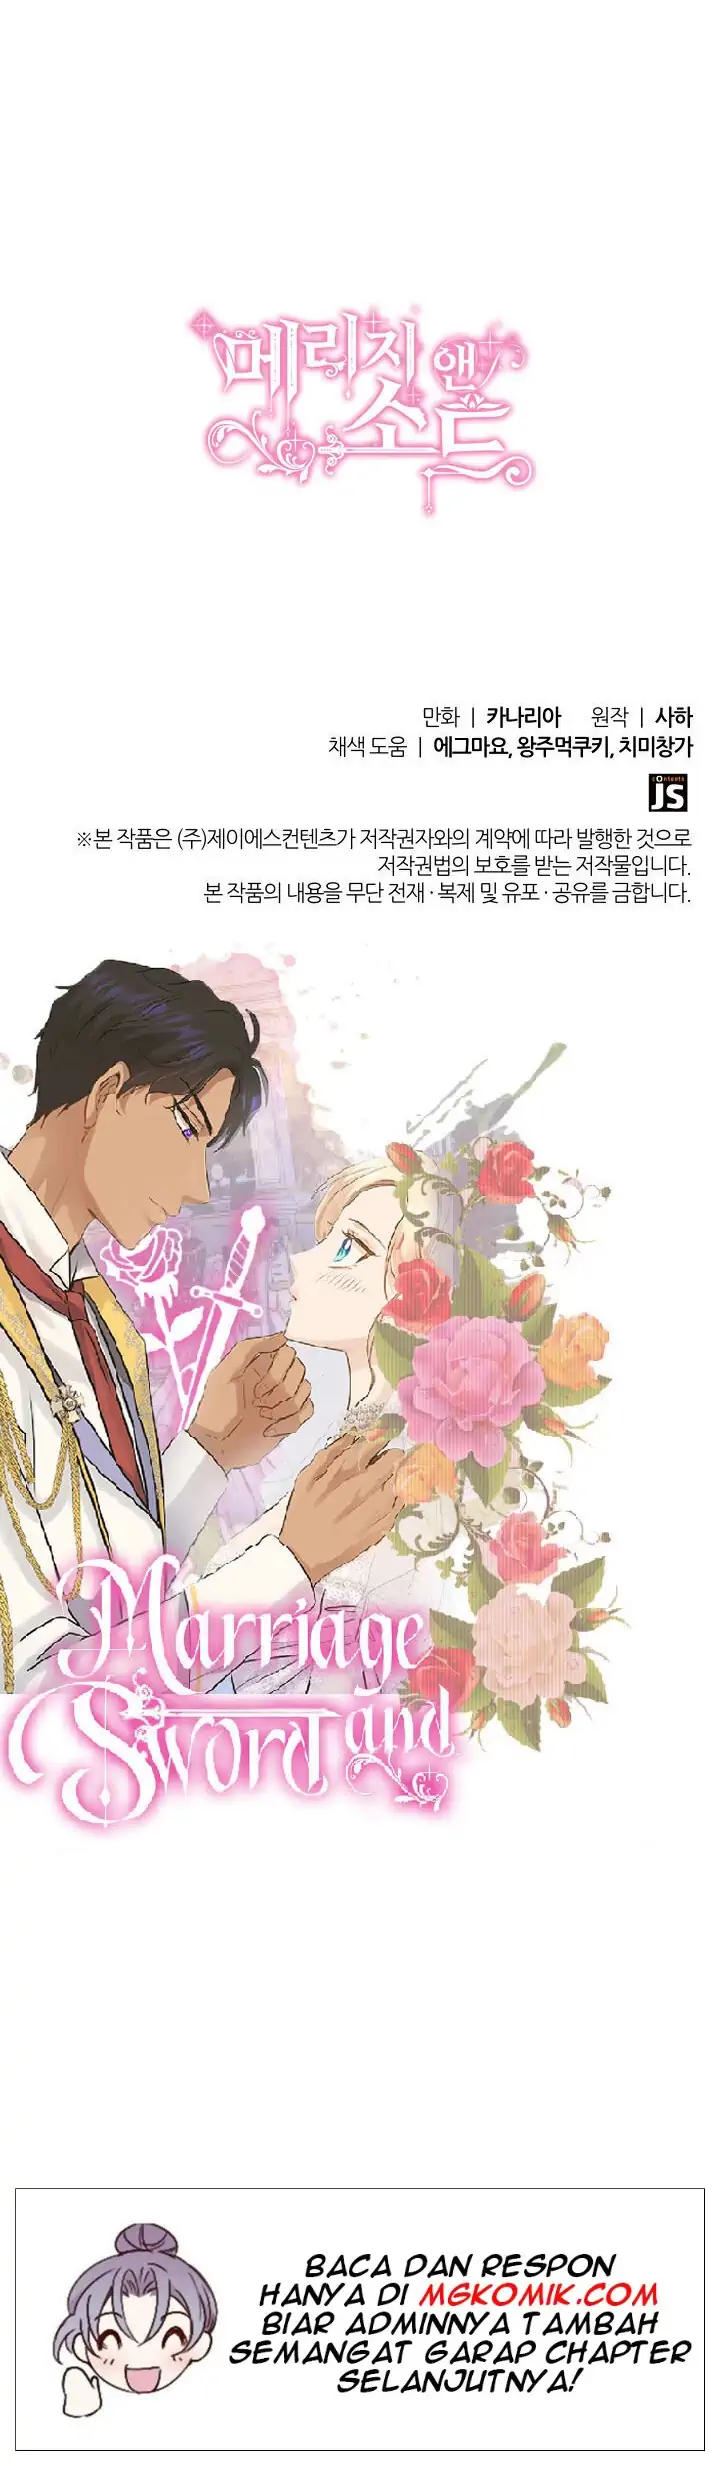 Marriage and Sword Chapter 12